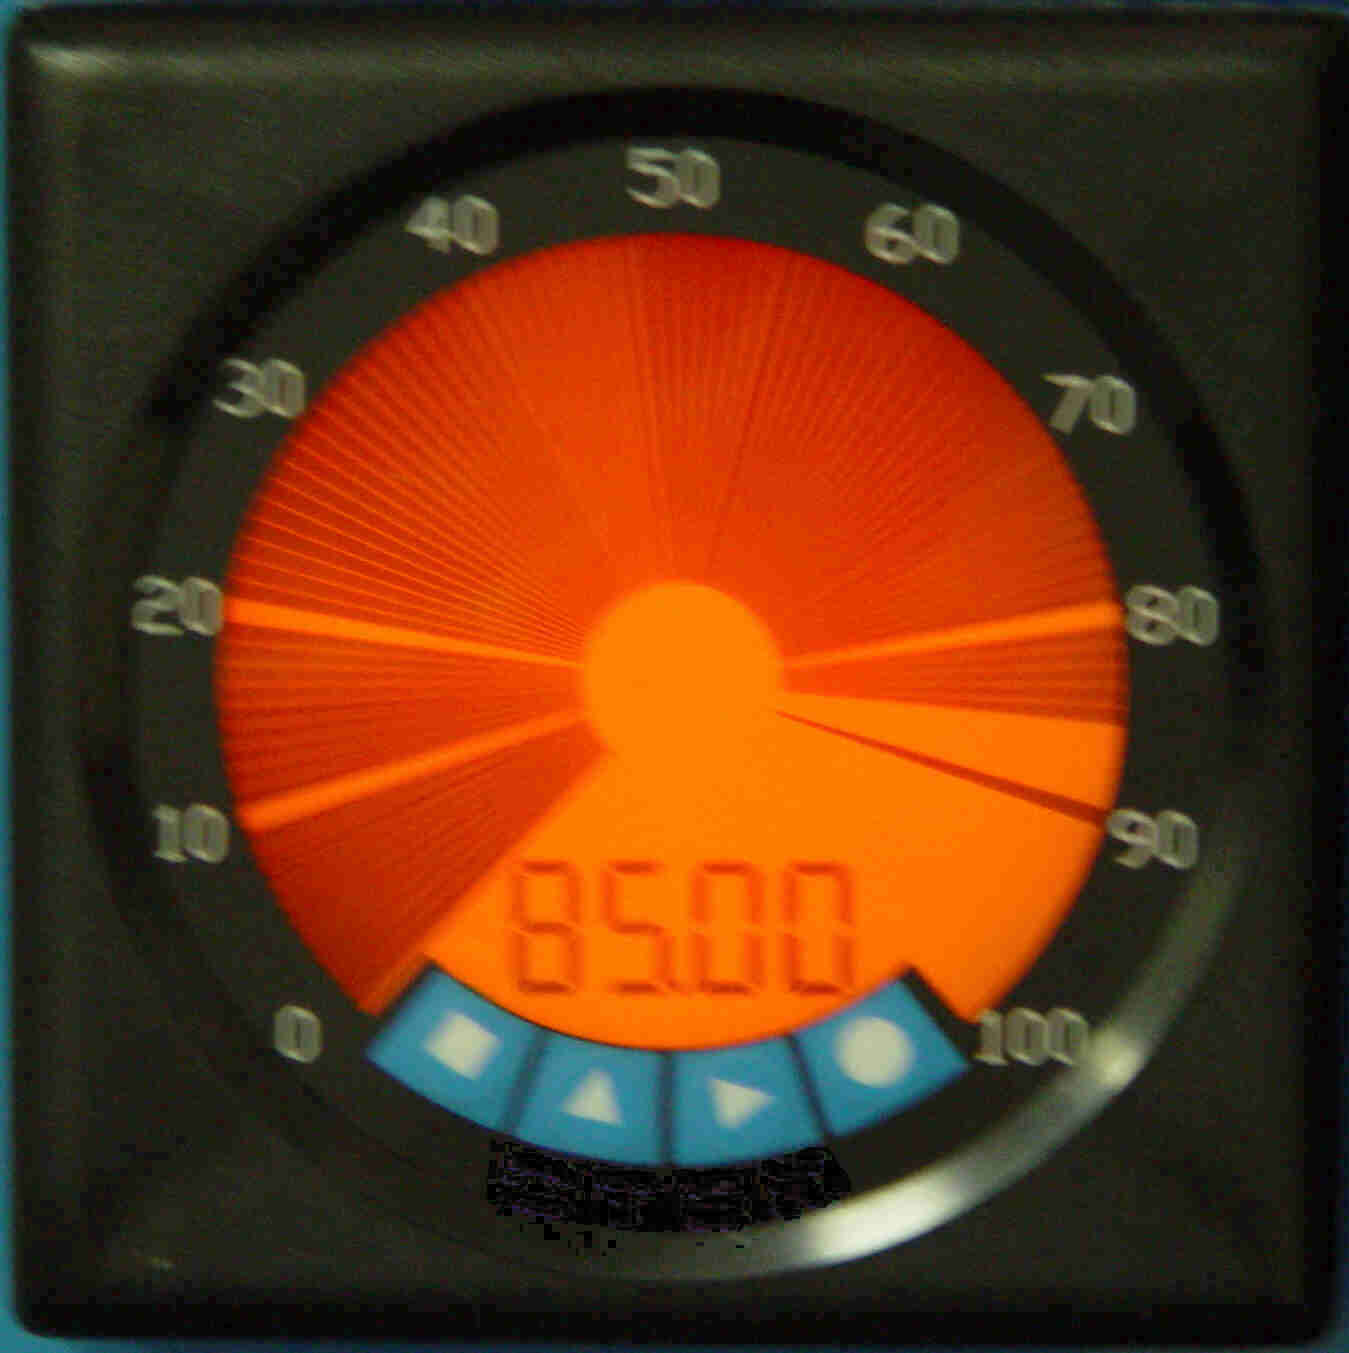 ANSI size Switchboard  Bargraph meter with 4 digit LCD display